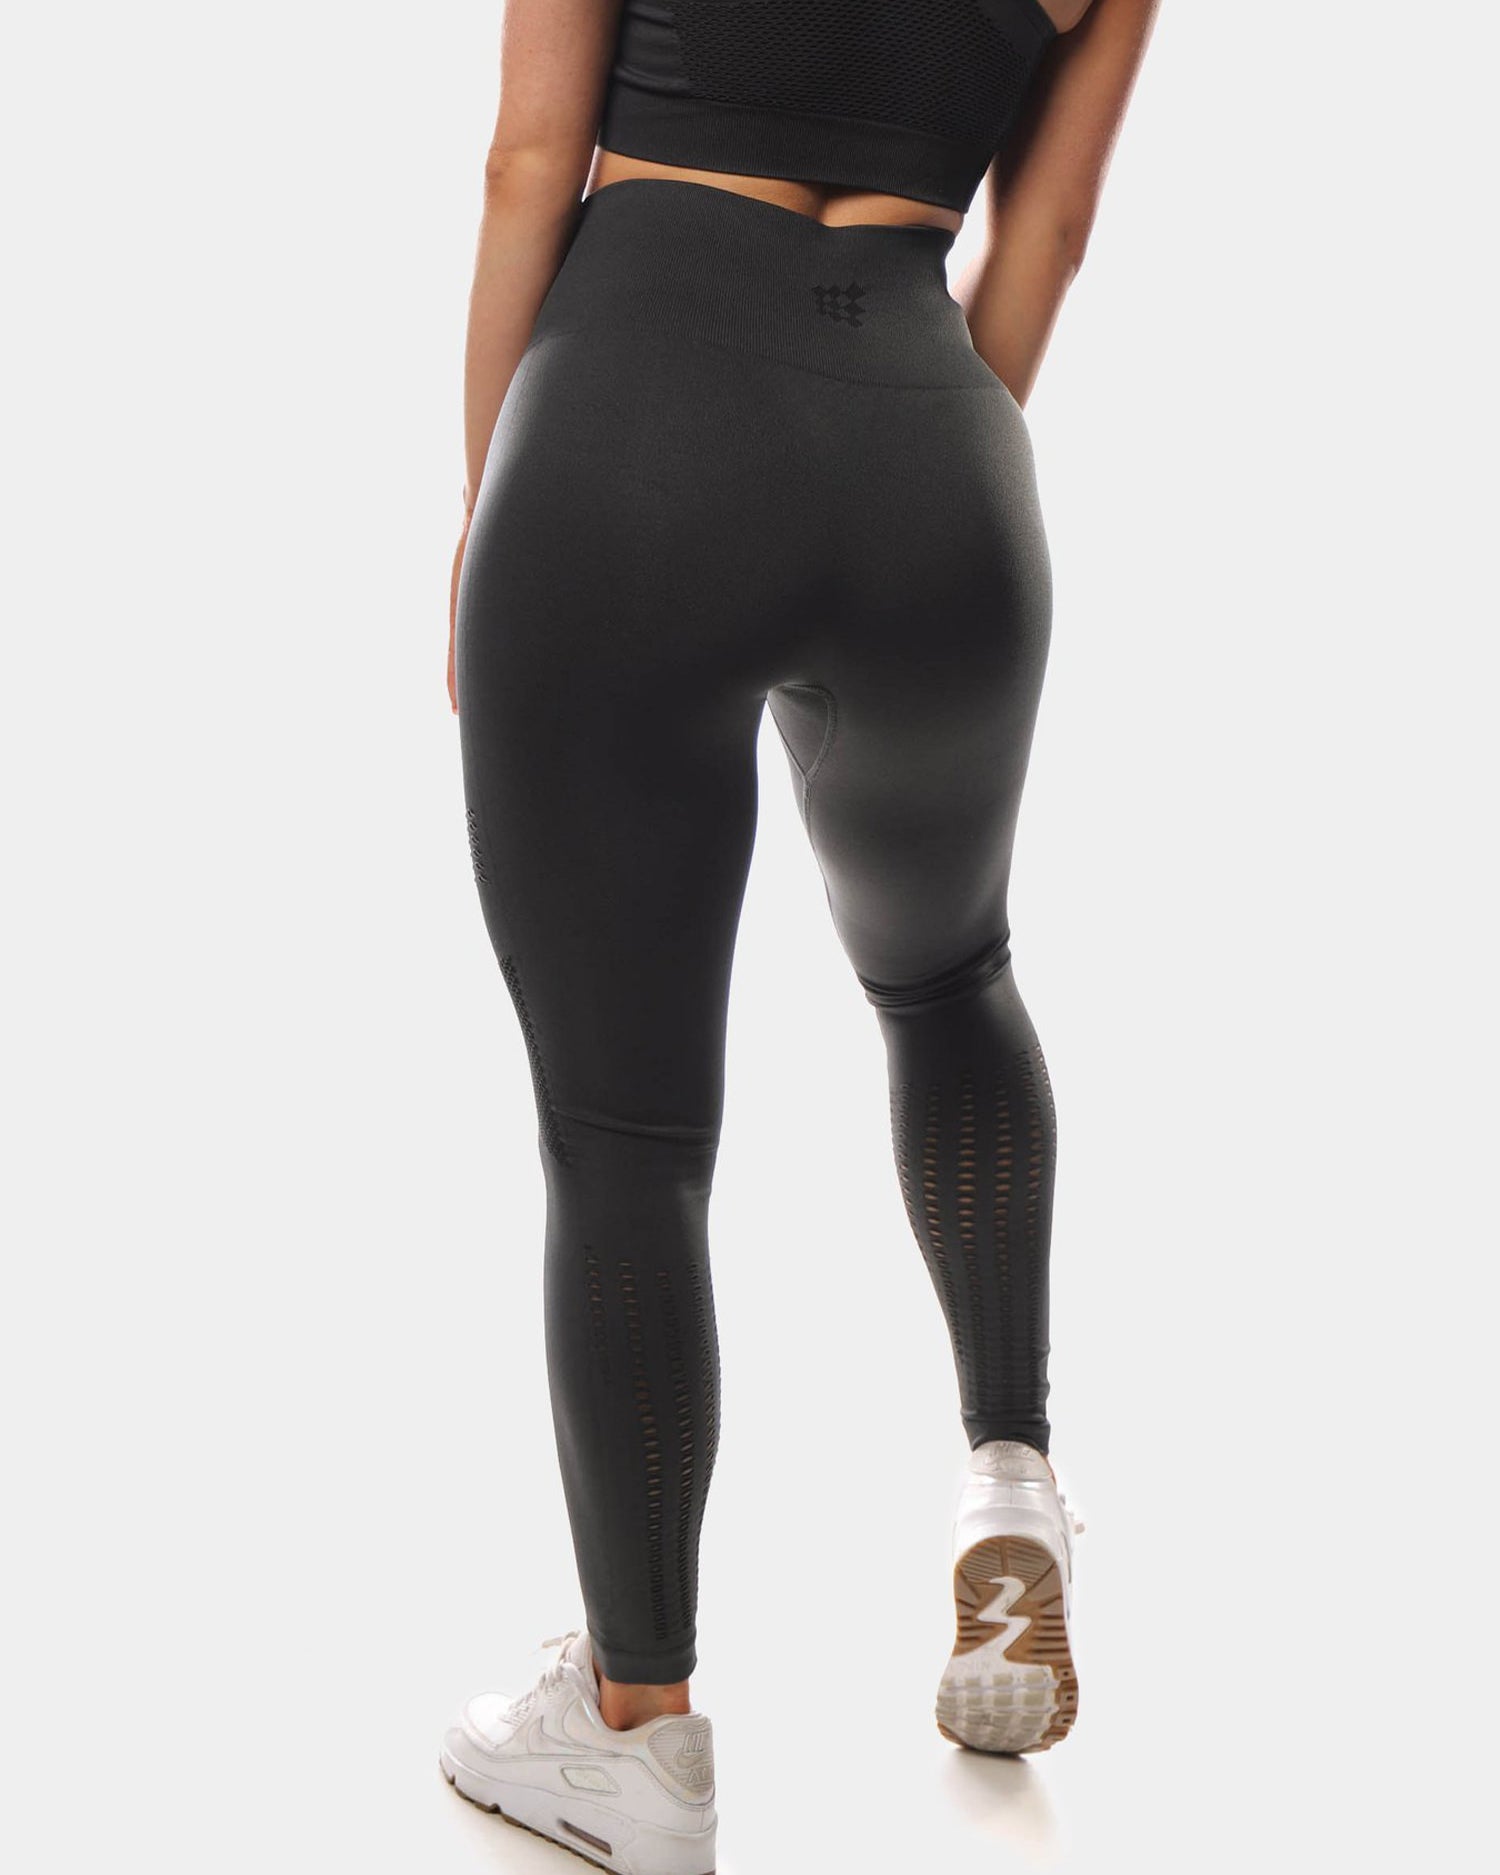 JED NORTH WILLOW LEGGINGS - CHARCOAL GRAY | VAAMSPORT